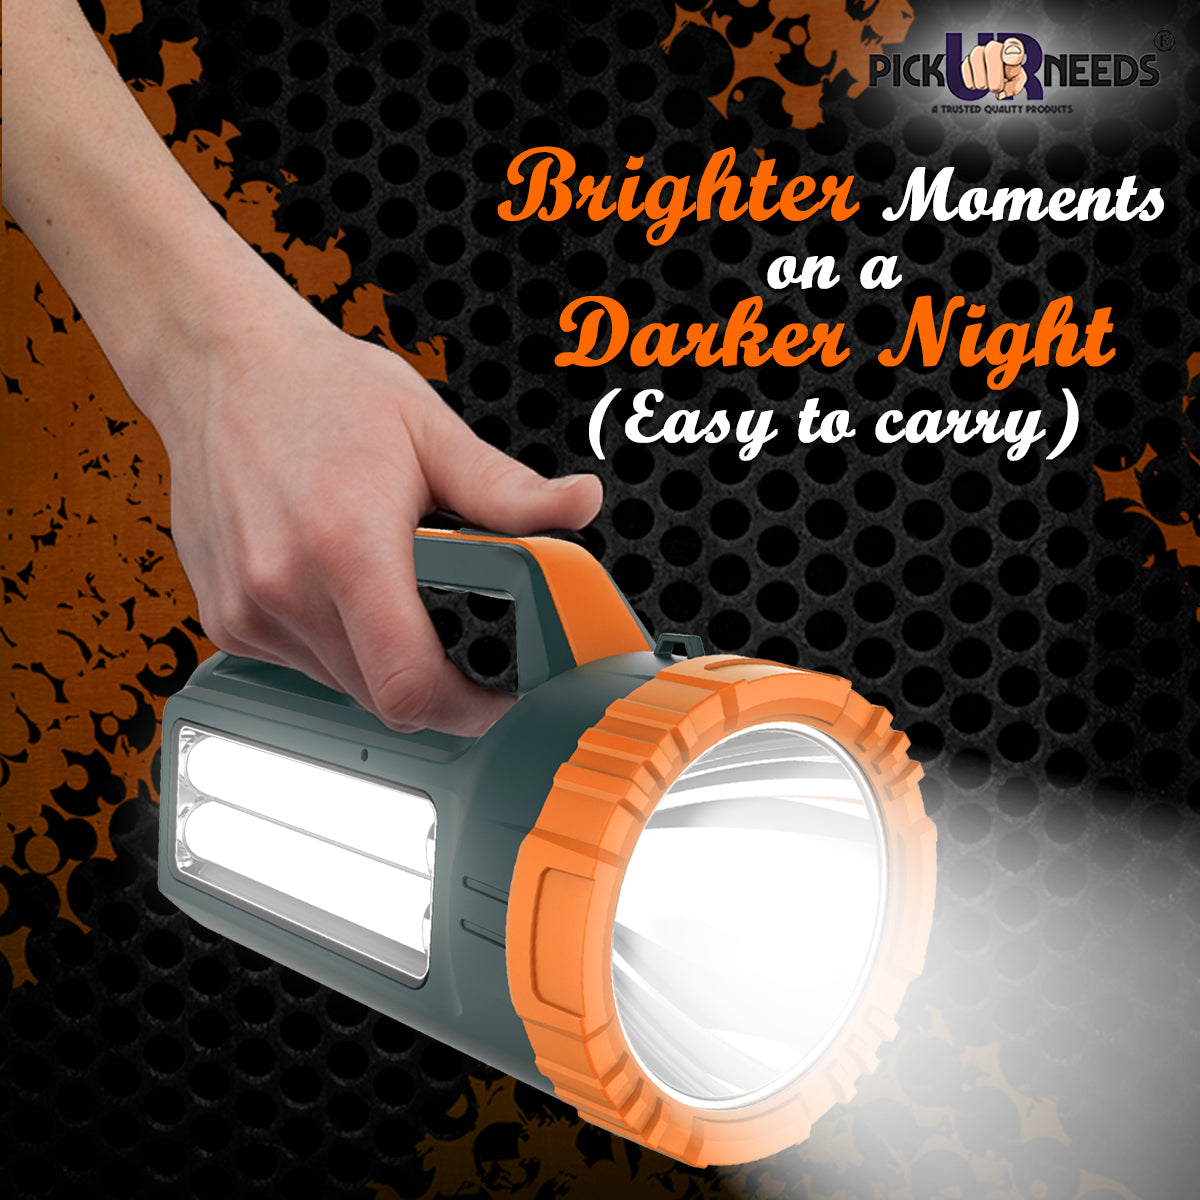 Pick Ur Needs Long Range Search Torch Light Emergency Rechargeable Handheld Torch + Side 2 Tube